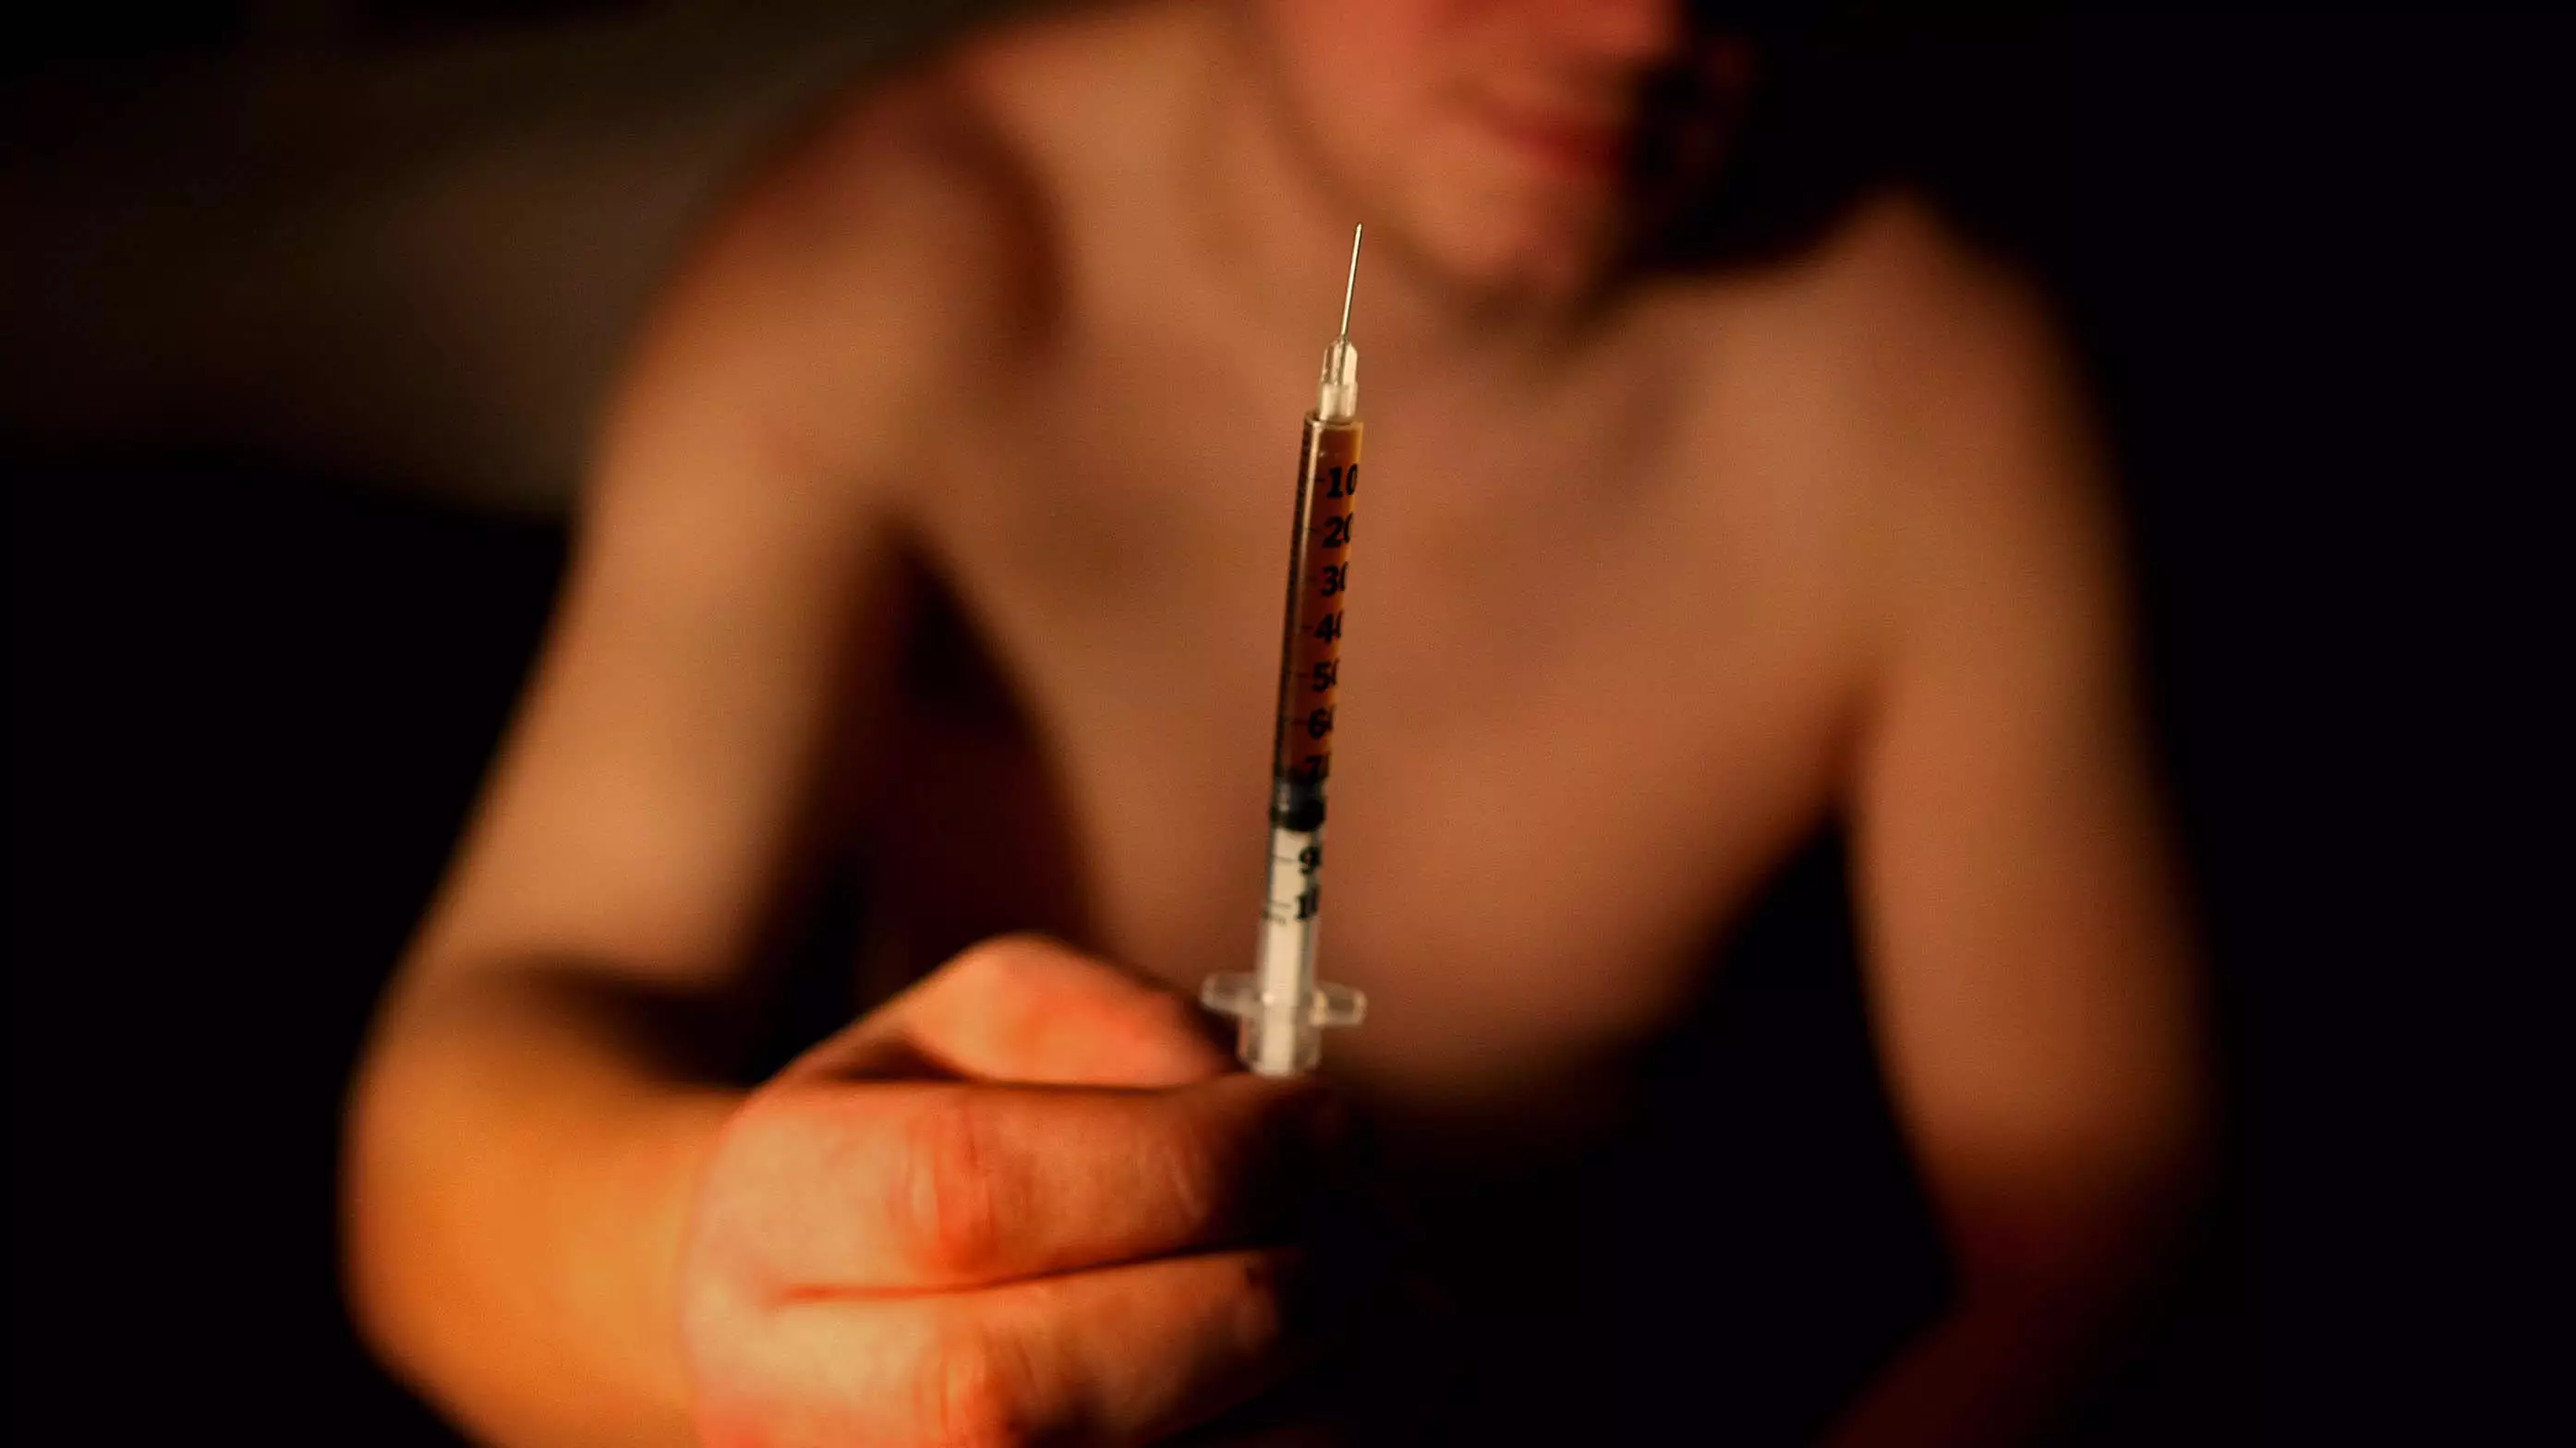 Victoria Set To Open First 'Heroin Injecting Room' Amid ‘Full Blown Health Crisis’ 